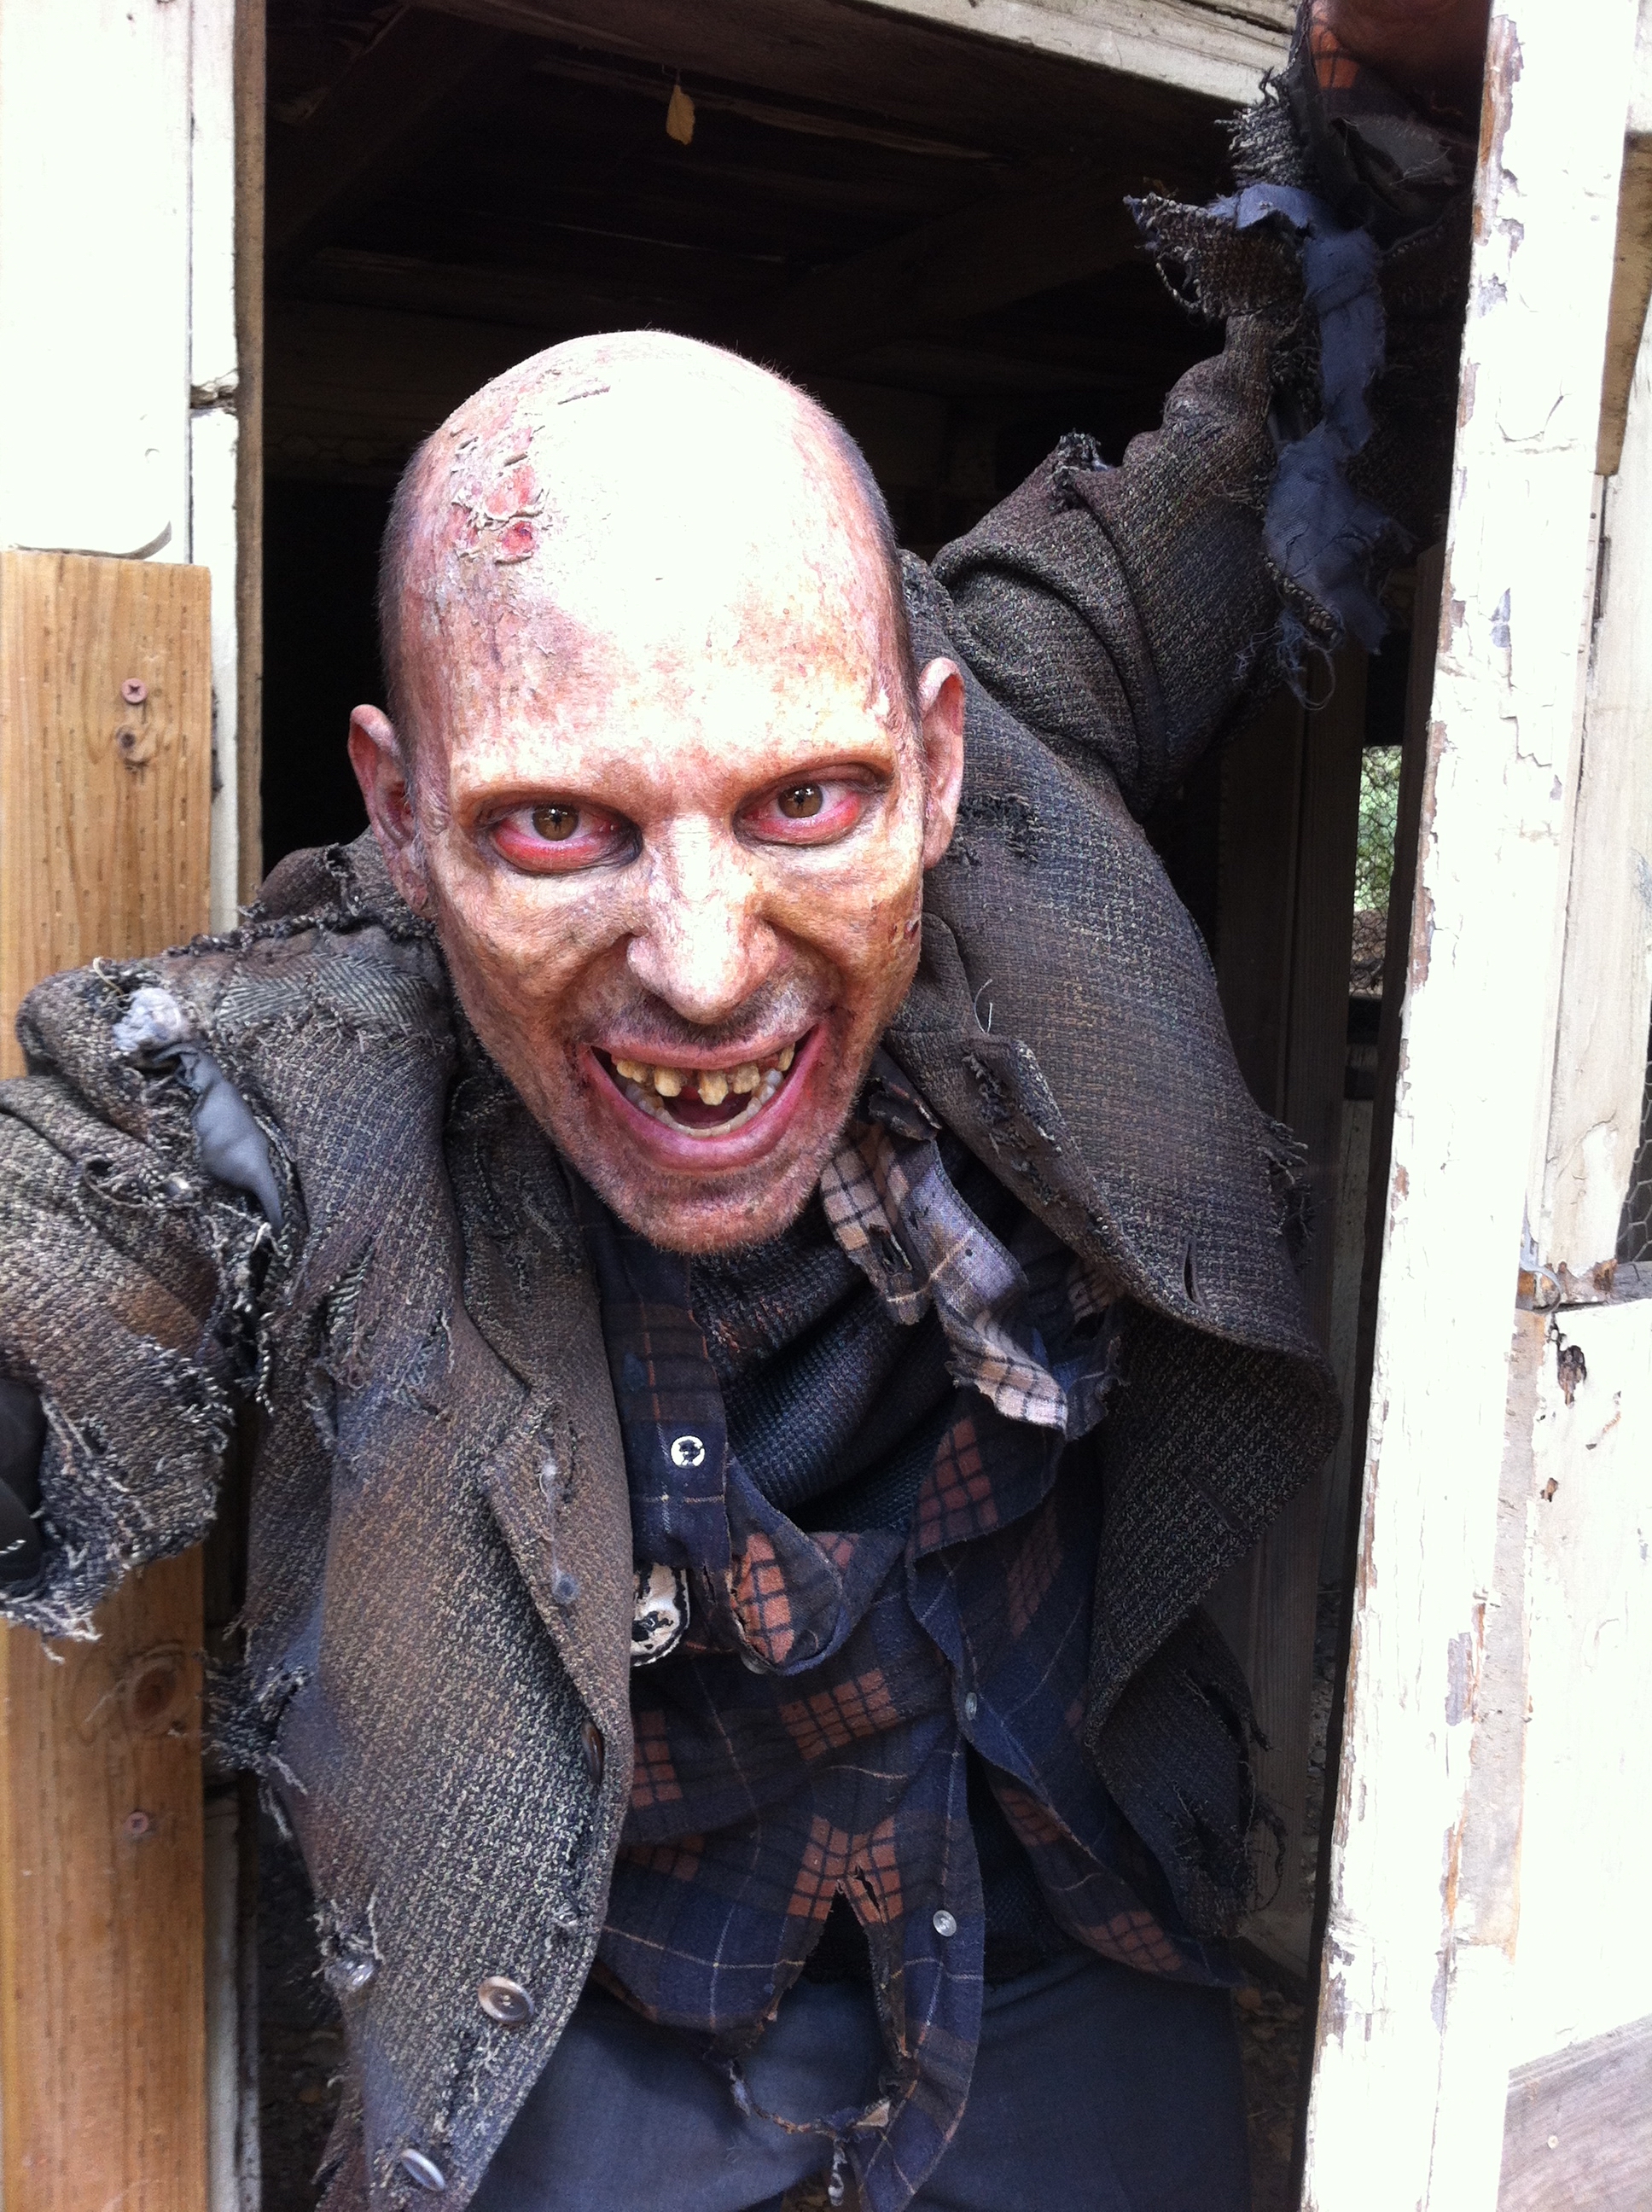 Jeff Blumberg as a zombie for commercial shoot